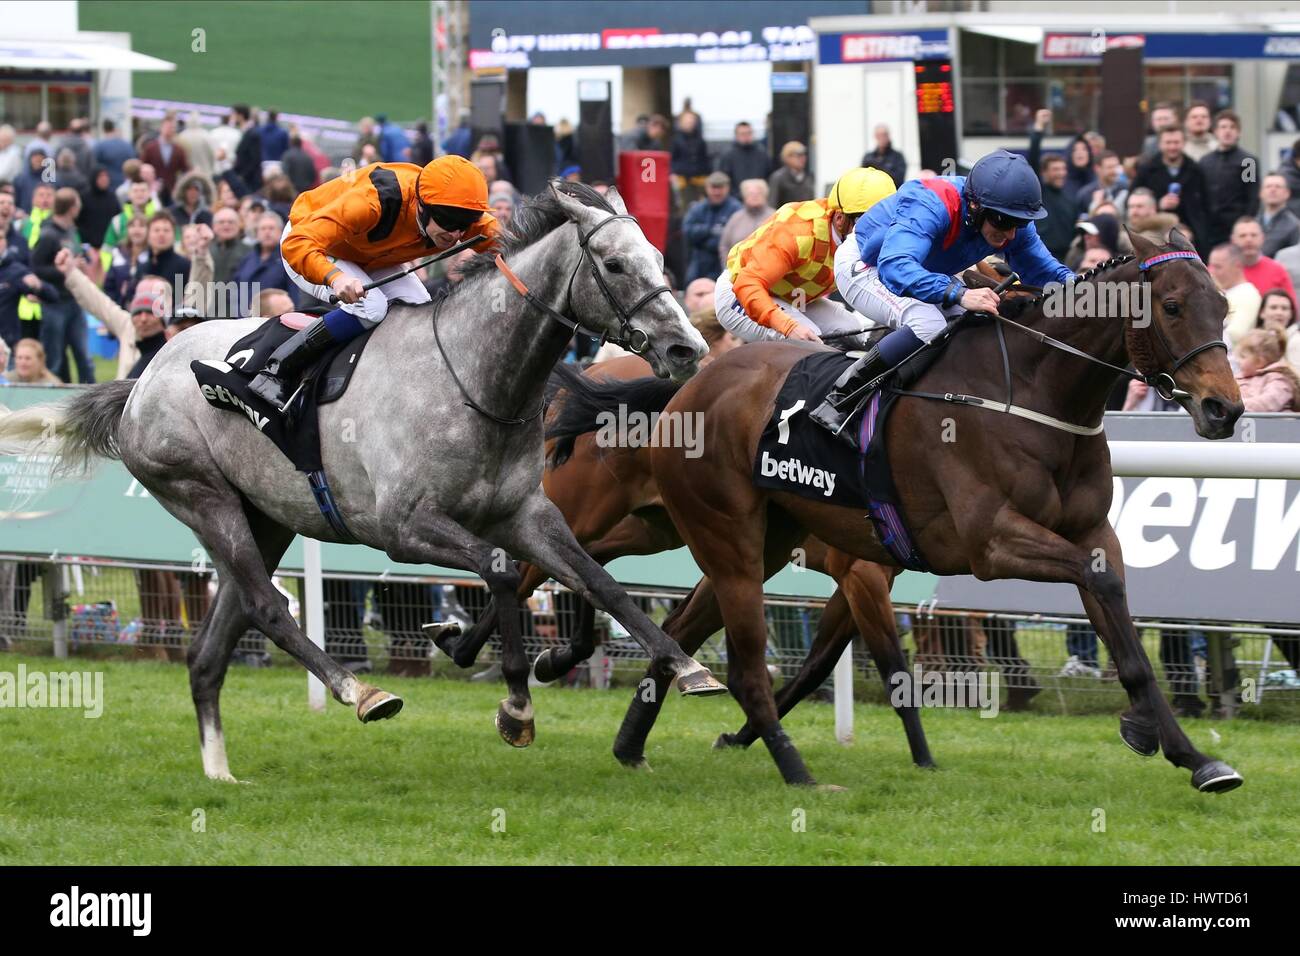 CLEVER COOKIE WINS AHEAD OF CU BETWAY YORKSHIRE BETWAY YORKSHIRE CUP YORK RACECOURSE YORK ENGLAND 13 May 2016 Stock Photo